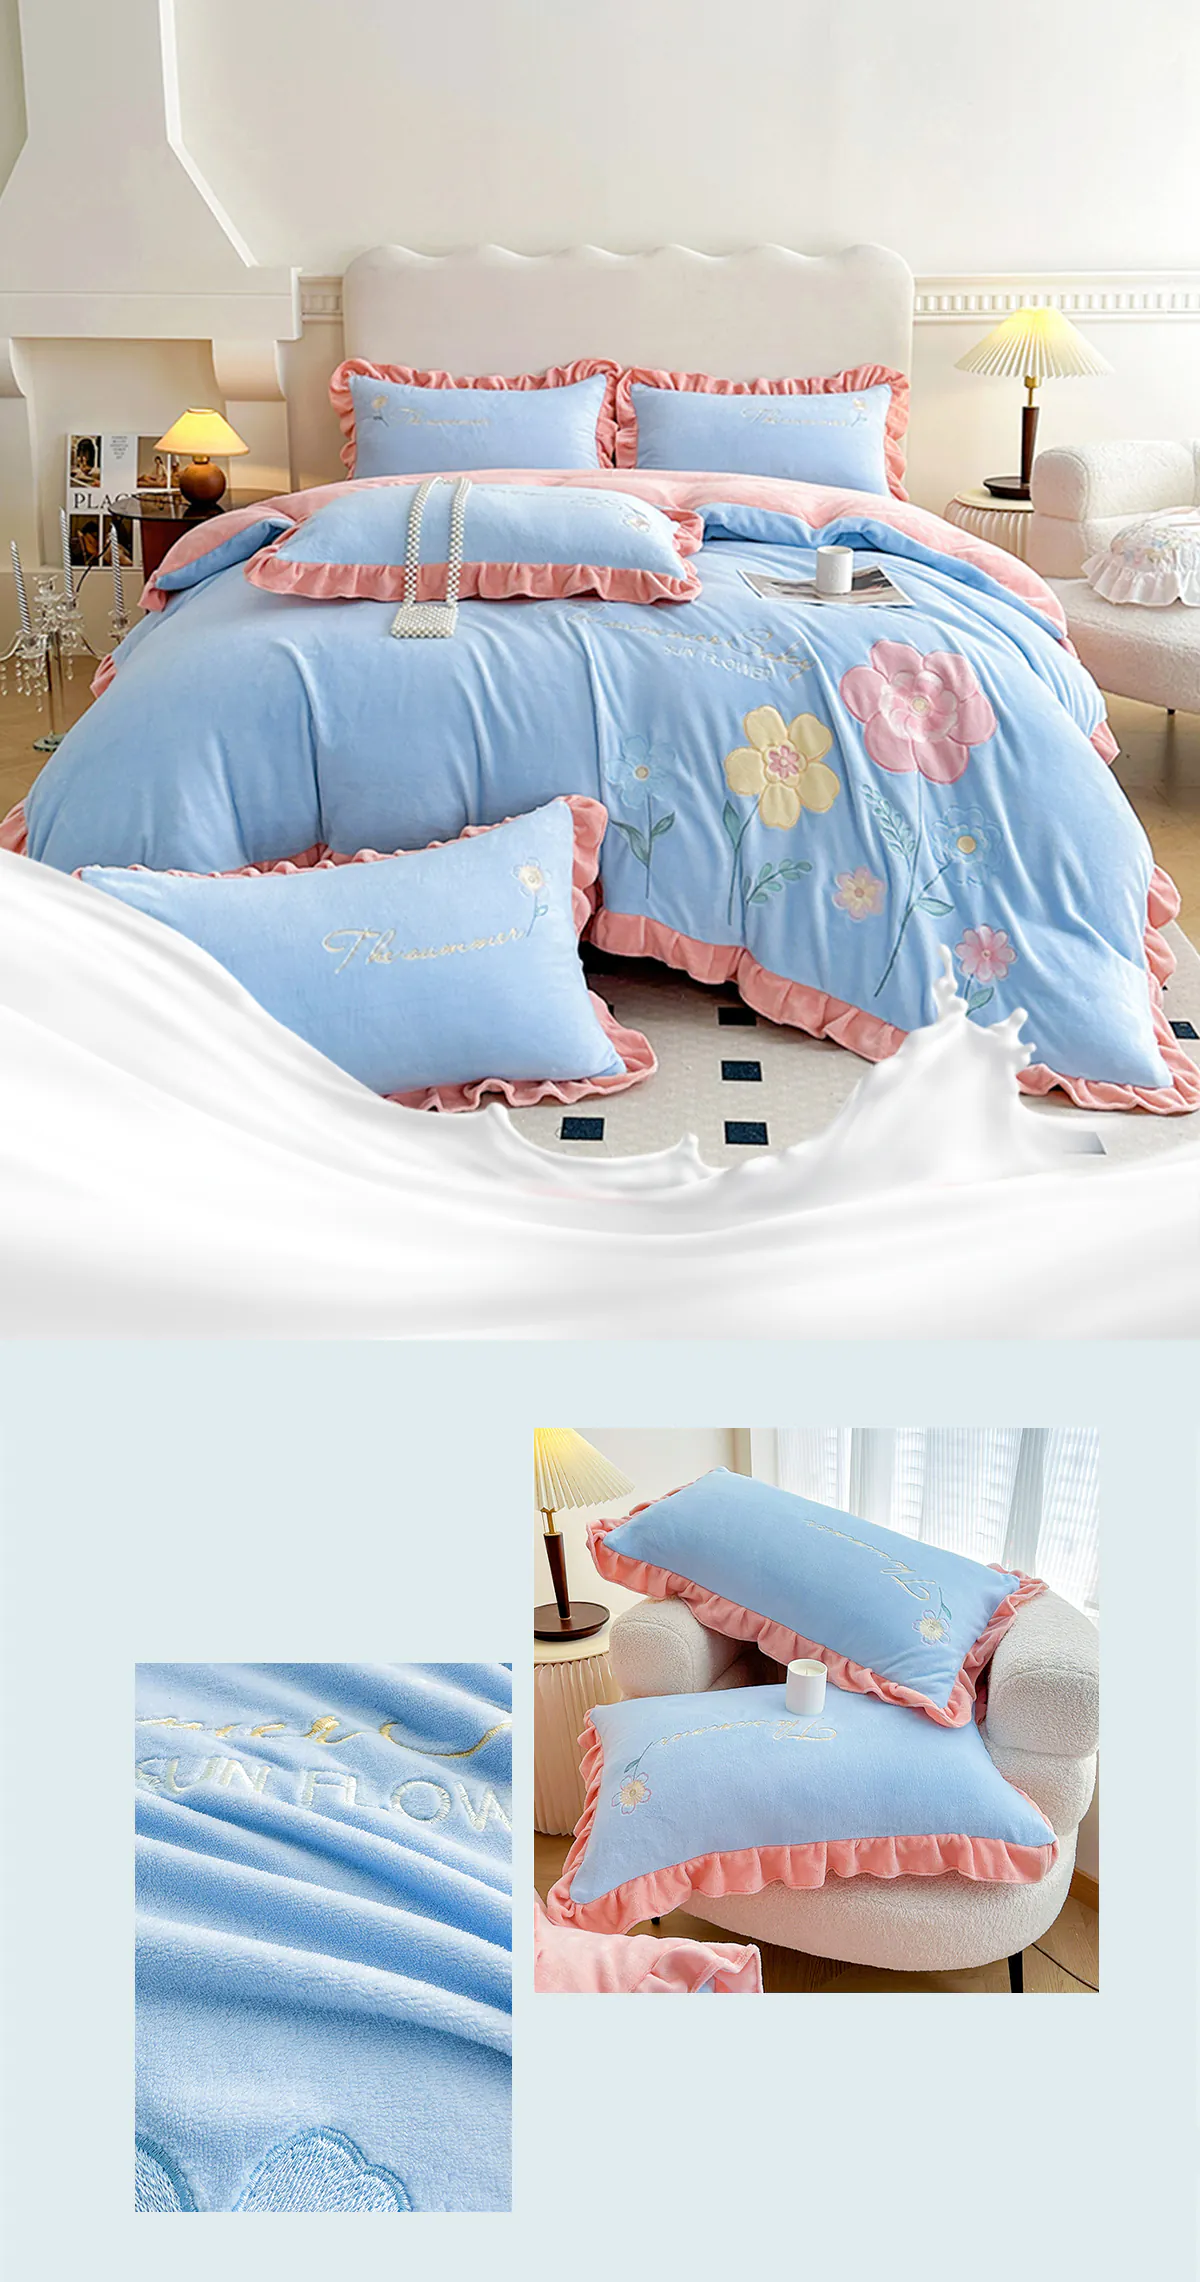 Comfy-Milk-Fiber-Embroidery-Quilt-Cover-Bed-Sheet-Pillowcases-Set18